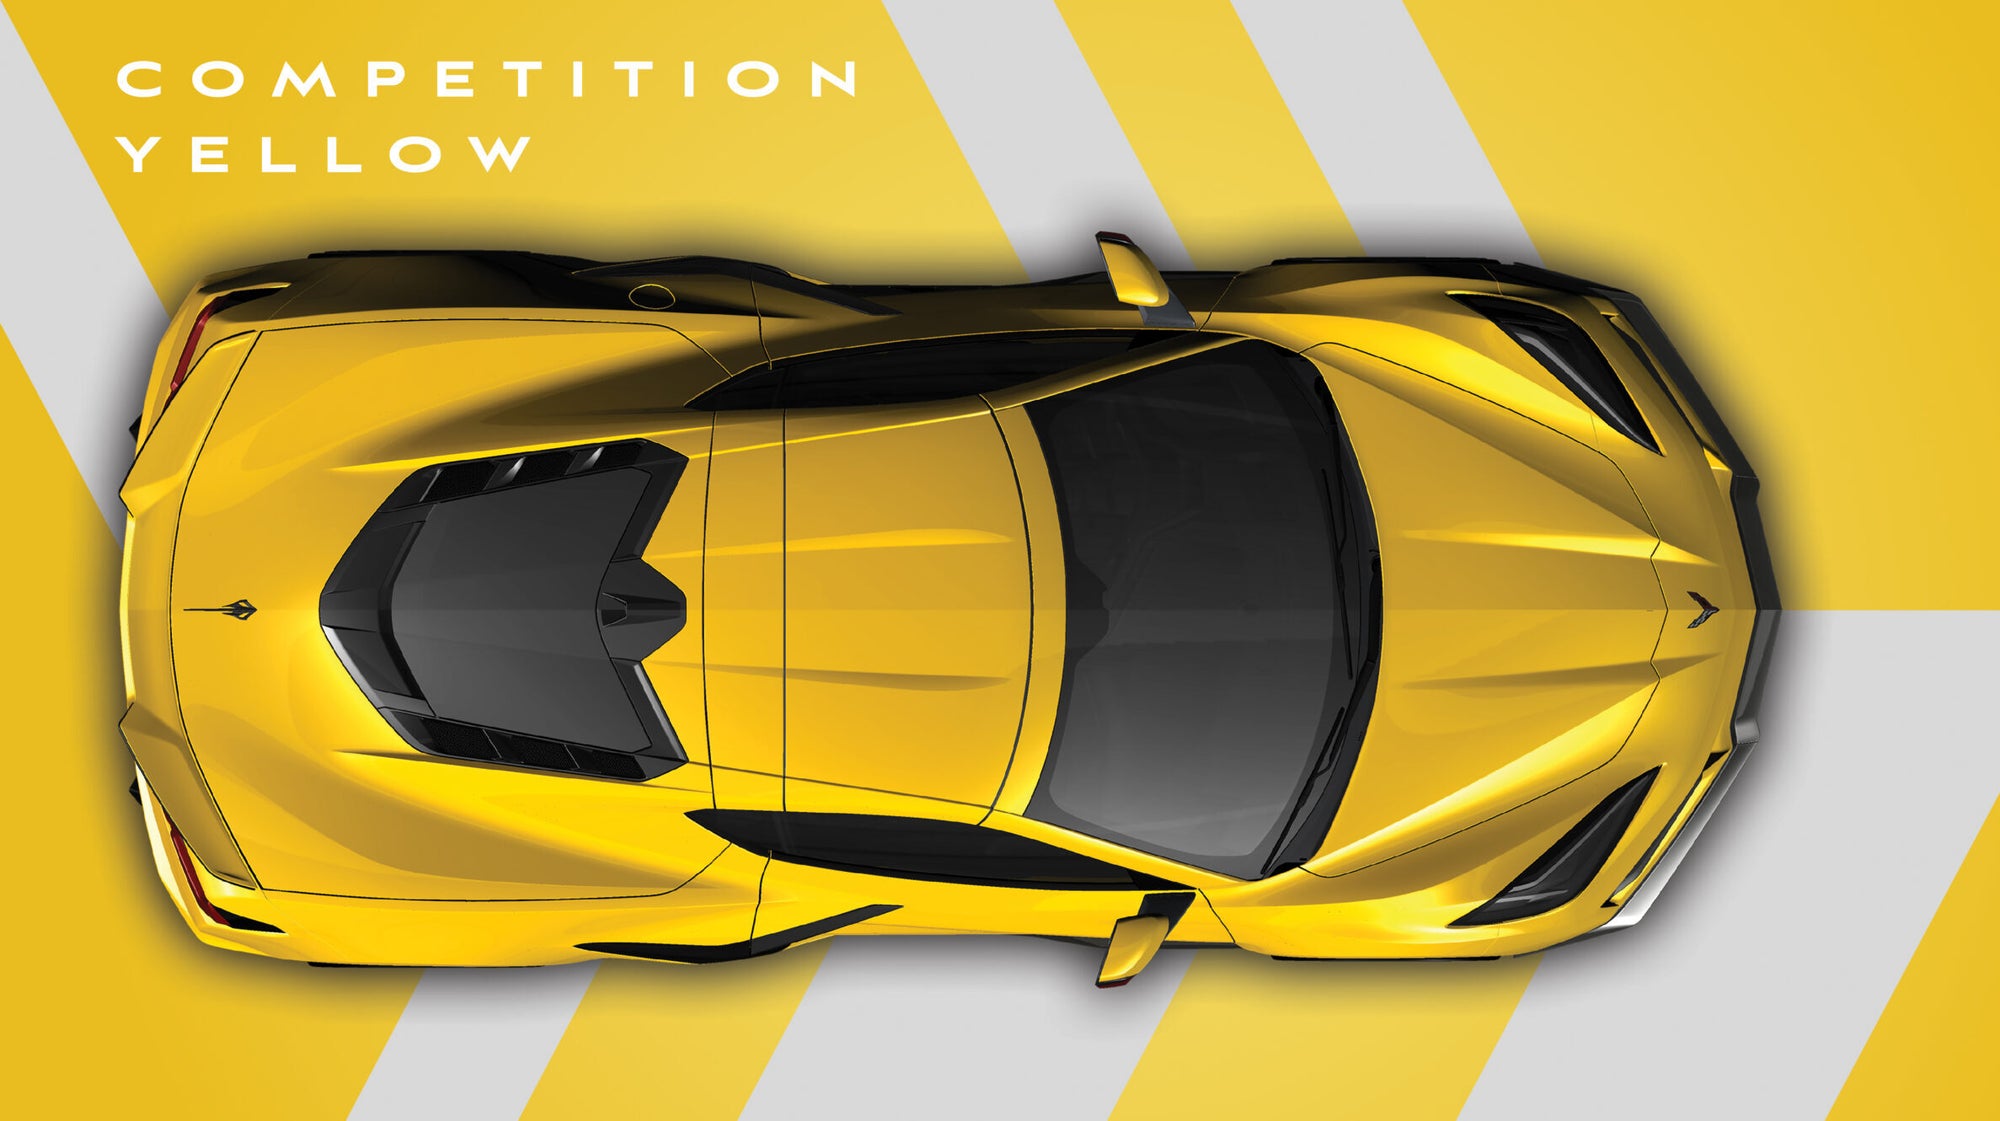 The Corvette C8 debuts a new racing yellow color option for the year 2025.